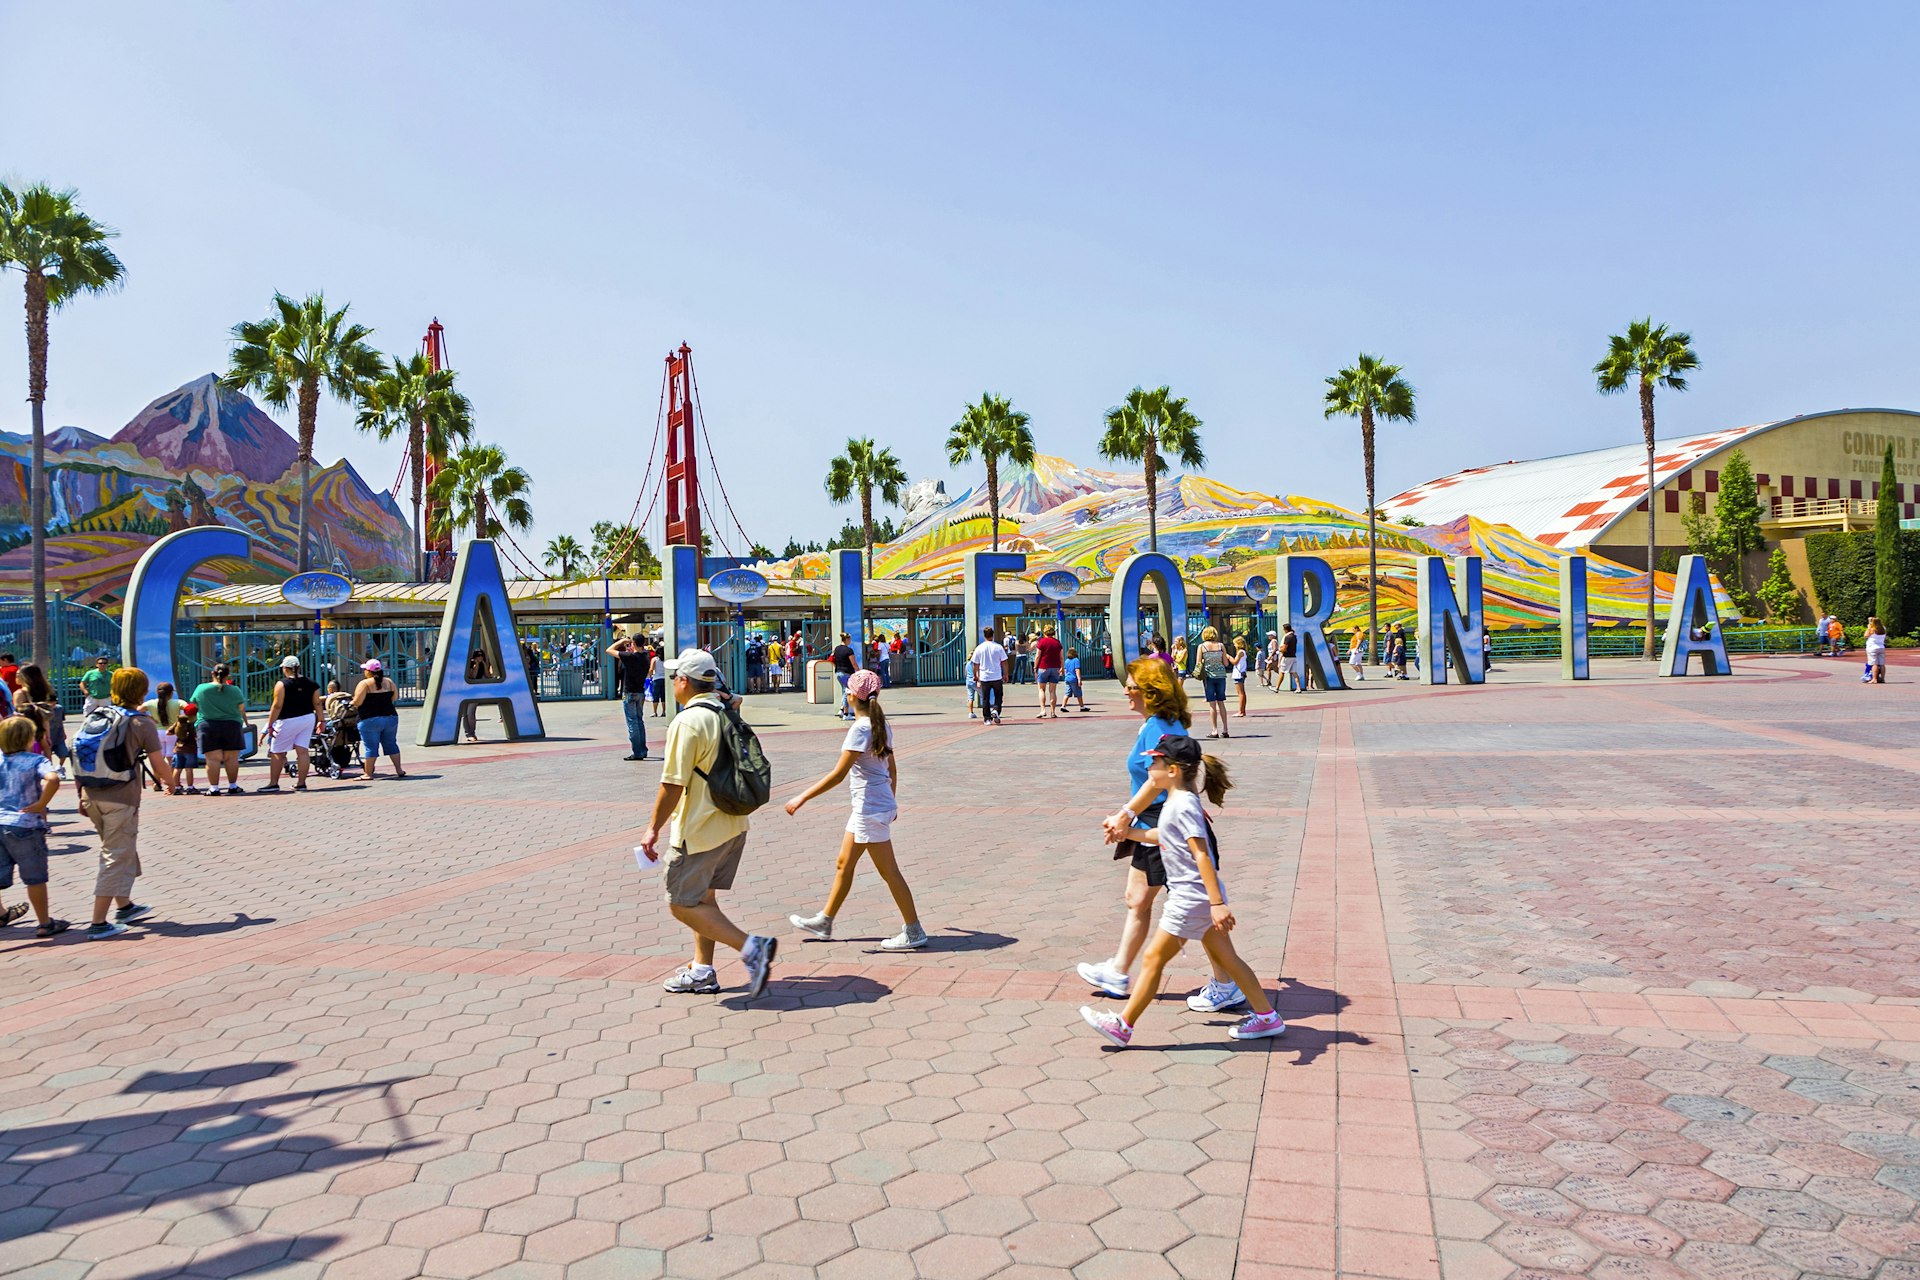 Features - people visit disneyland and walk over commemorative bricks with